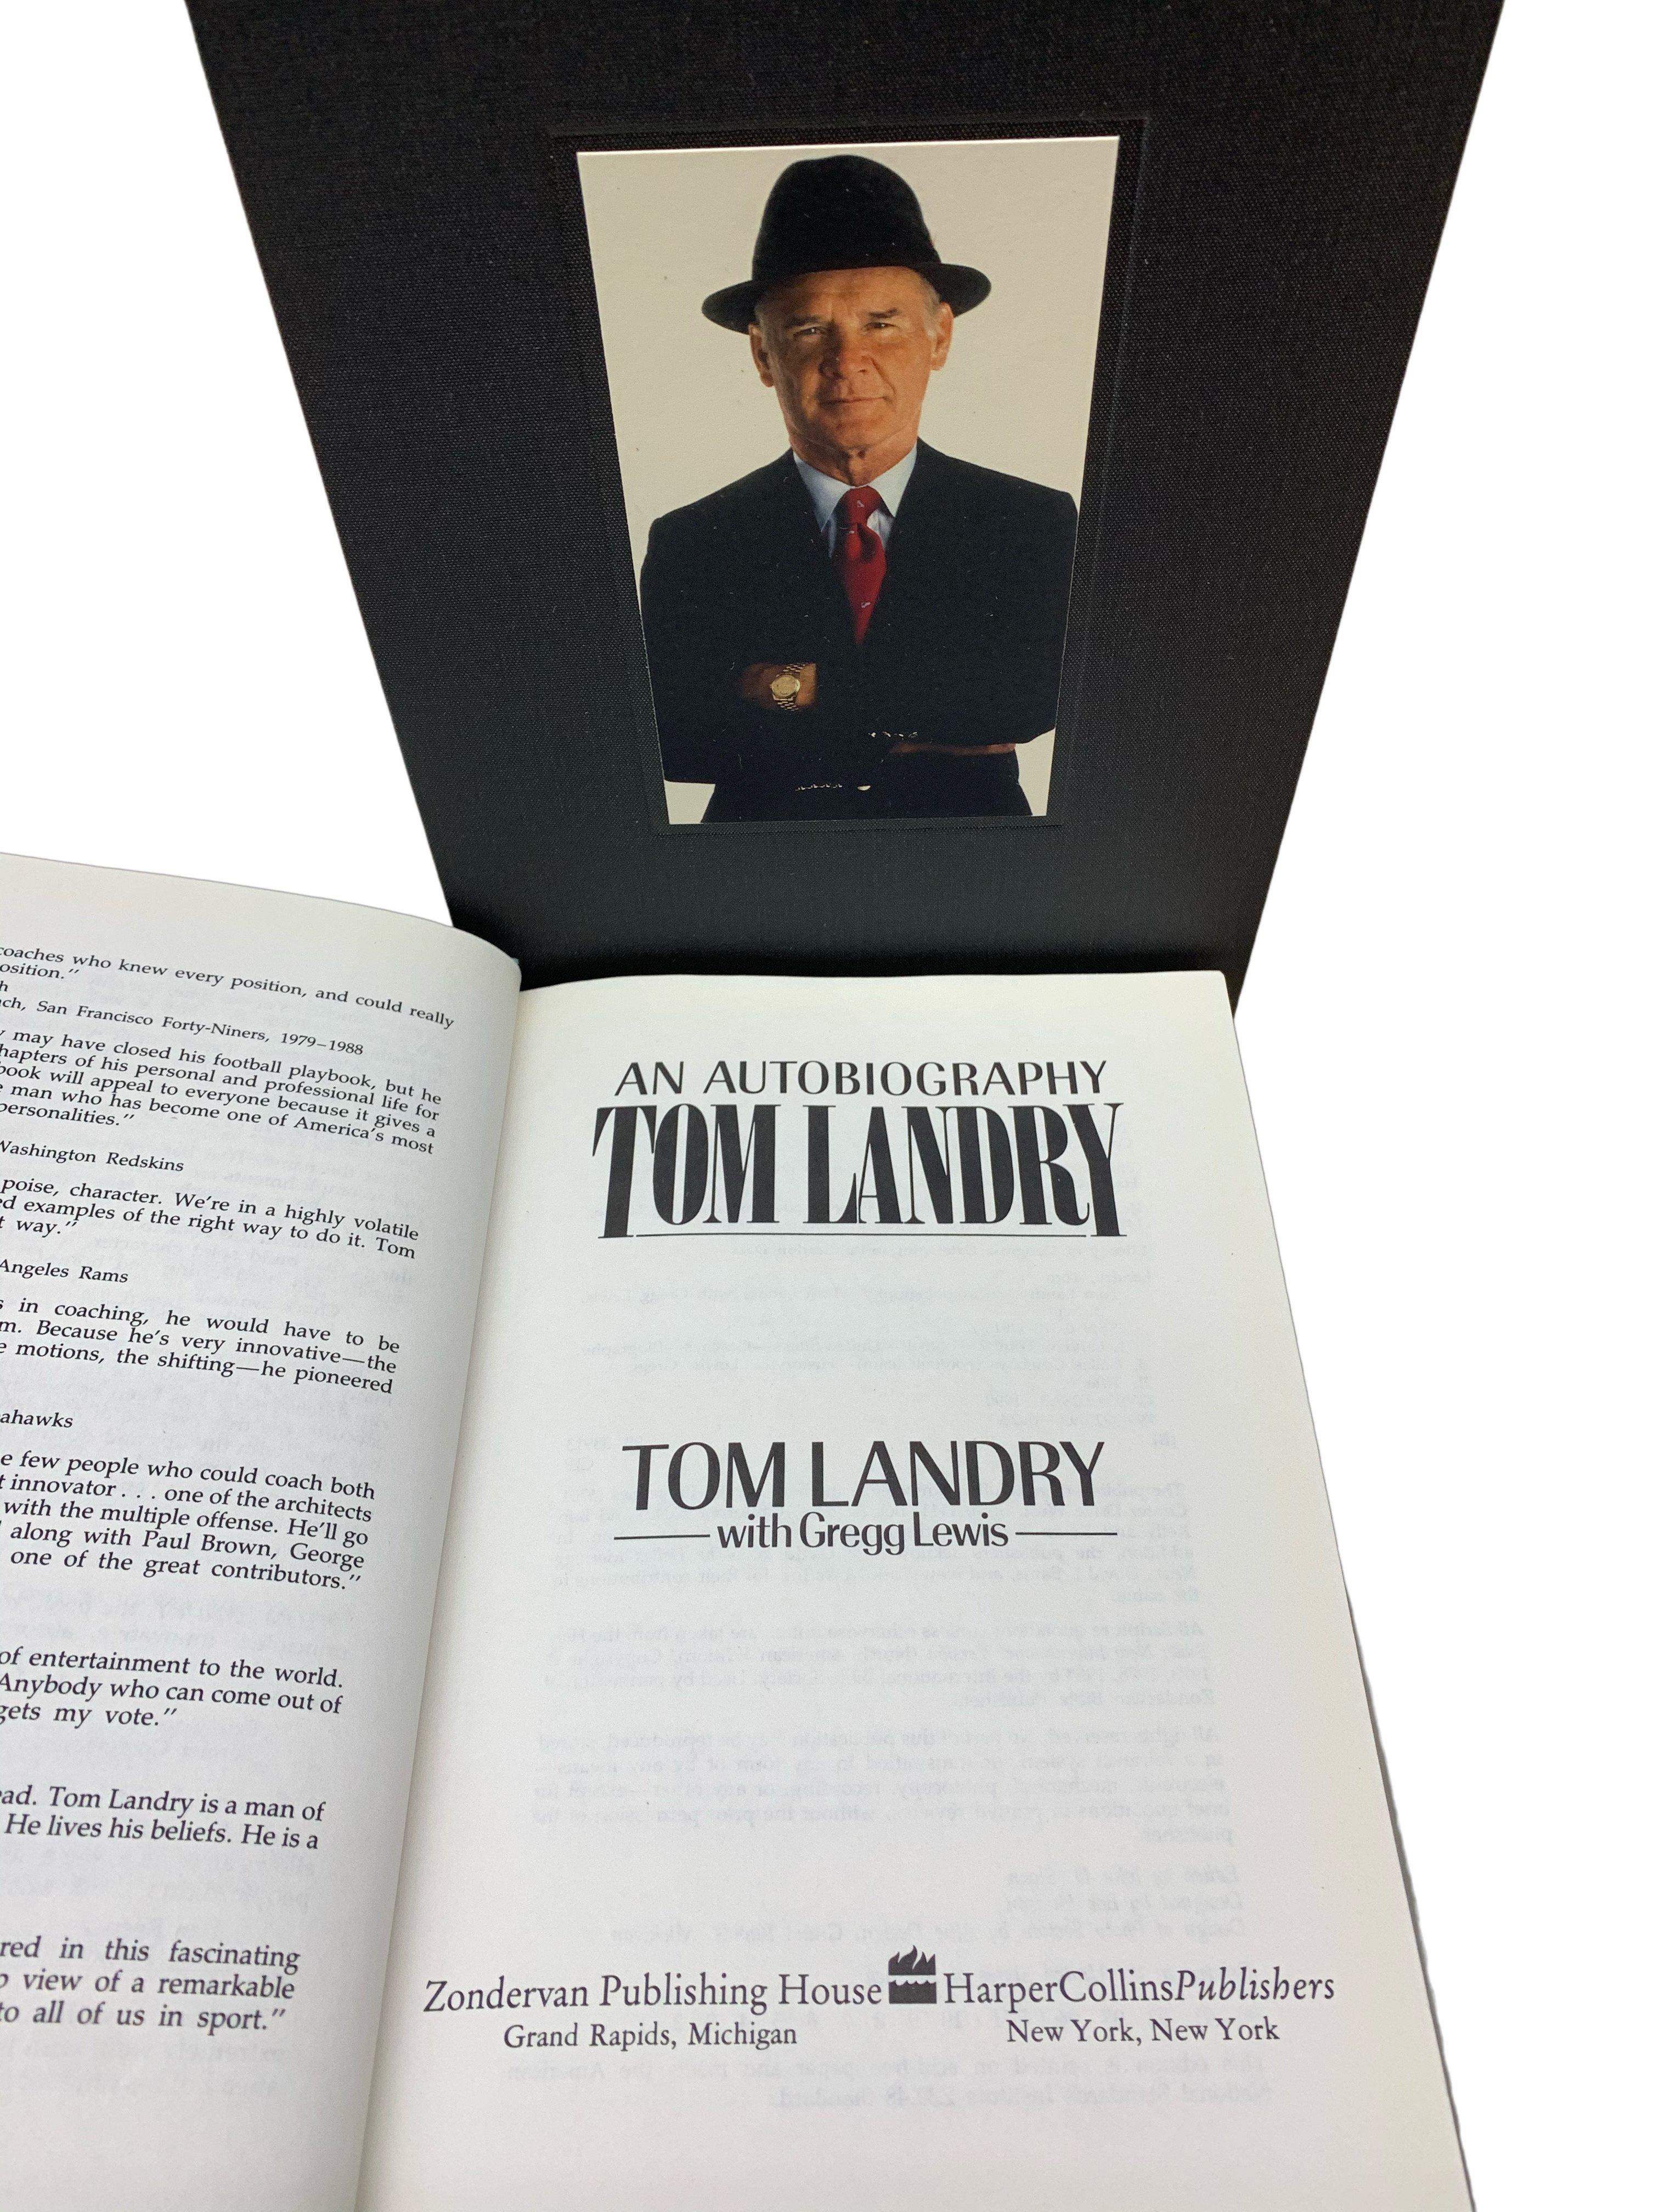 American Tom Landry An Autobiography, Signed and Inscribed by Tom Landry, 1st Ed., 1990